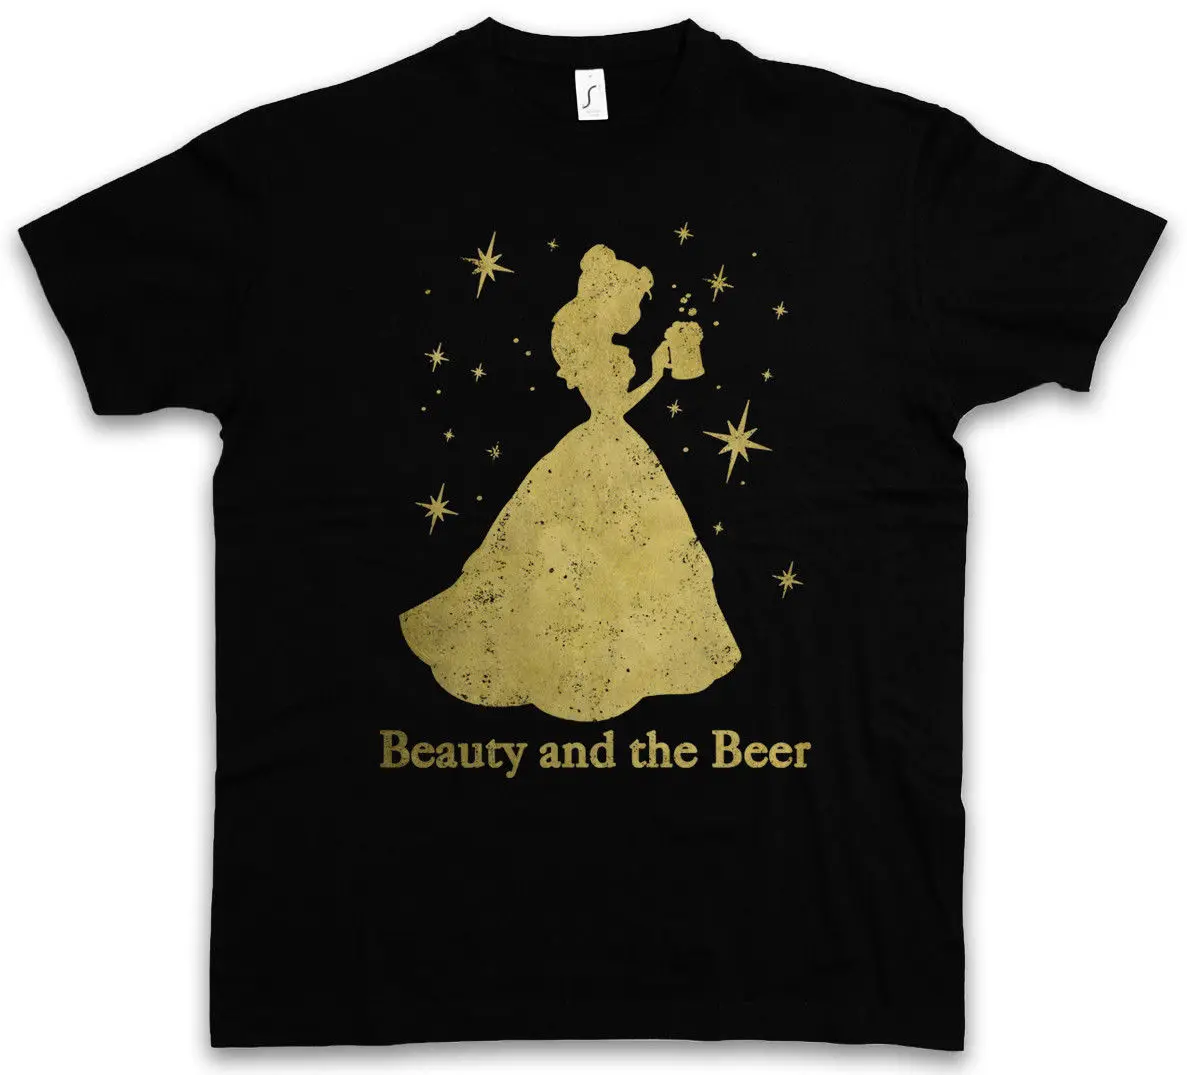 

Beauty and the Beer T-Shirt Fun Alcohol Drunk intoxicated Party drunken Hangover Printed Mens Men T Shirt Classic